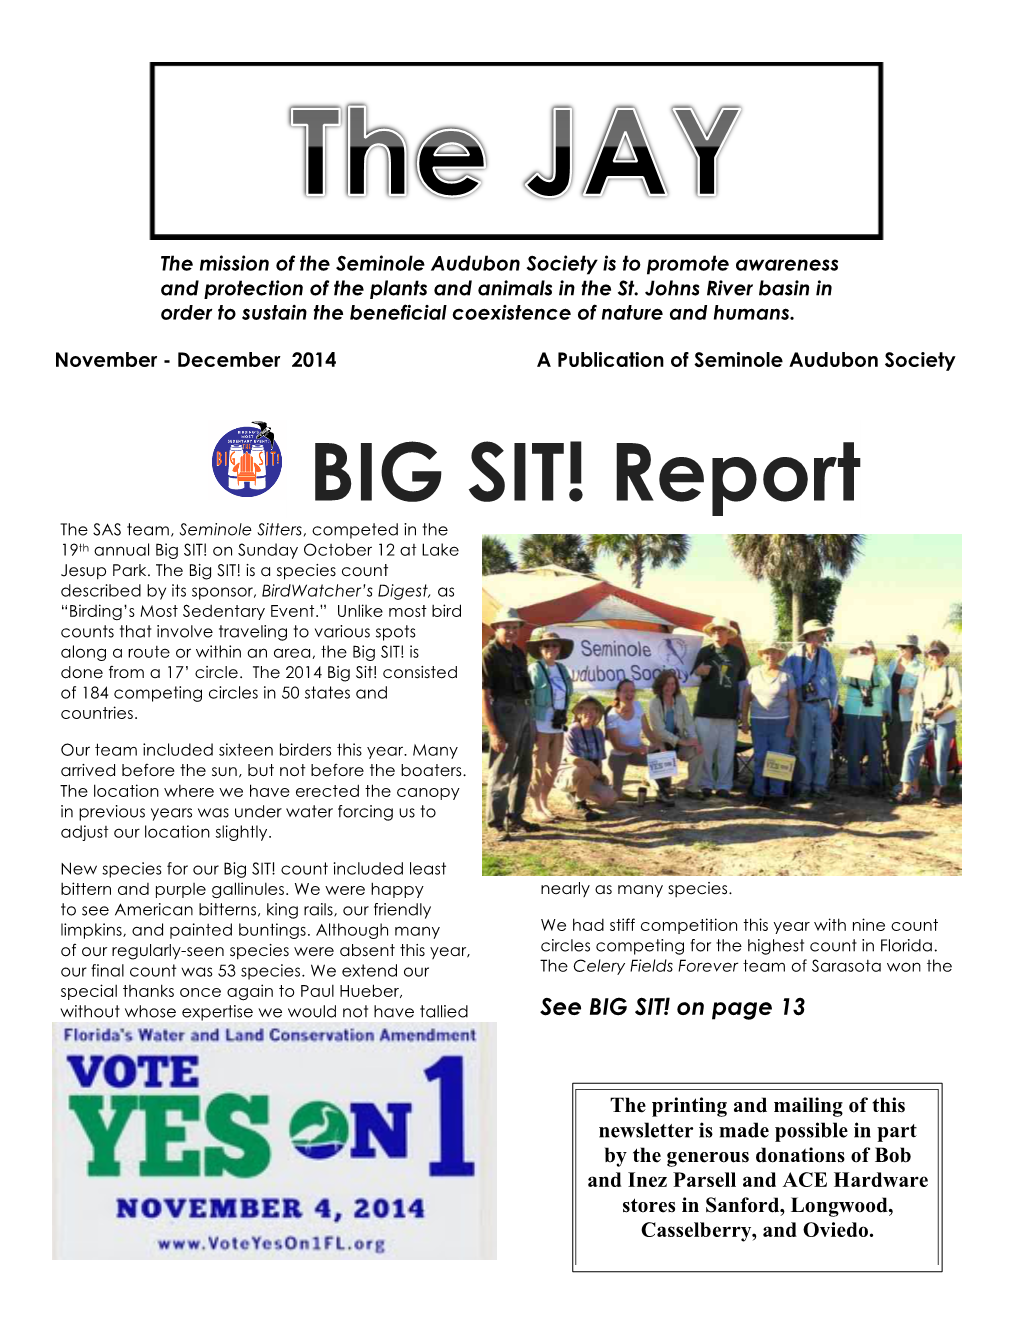 BIG SIT! Report the SAS Team, Seminole Sitters, Competed in the 19Th Annual Big SIT! on Sunday October 12 at Lake Jesup Park